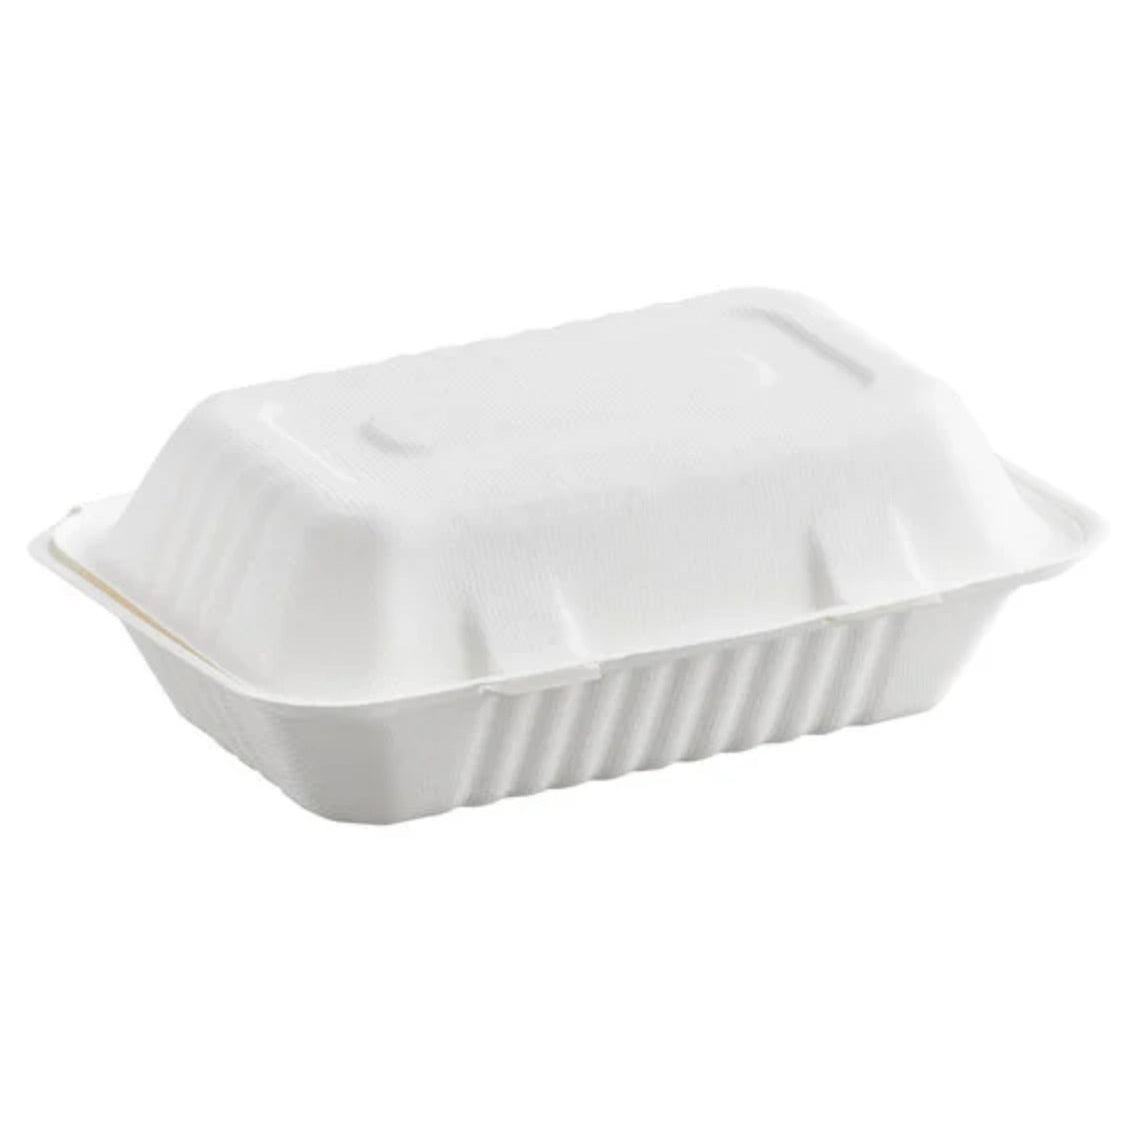 9" x 6" x 3" Compostable Sugarcane / Bagasse 1 Compartment Take-Out Container - 200/Case